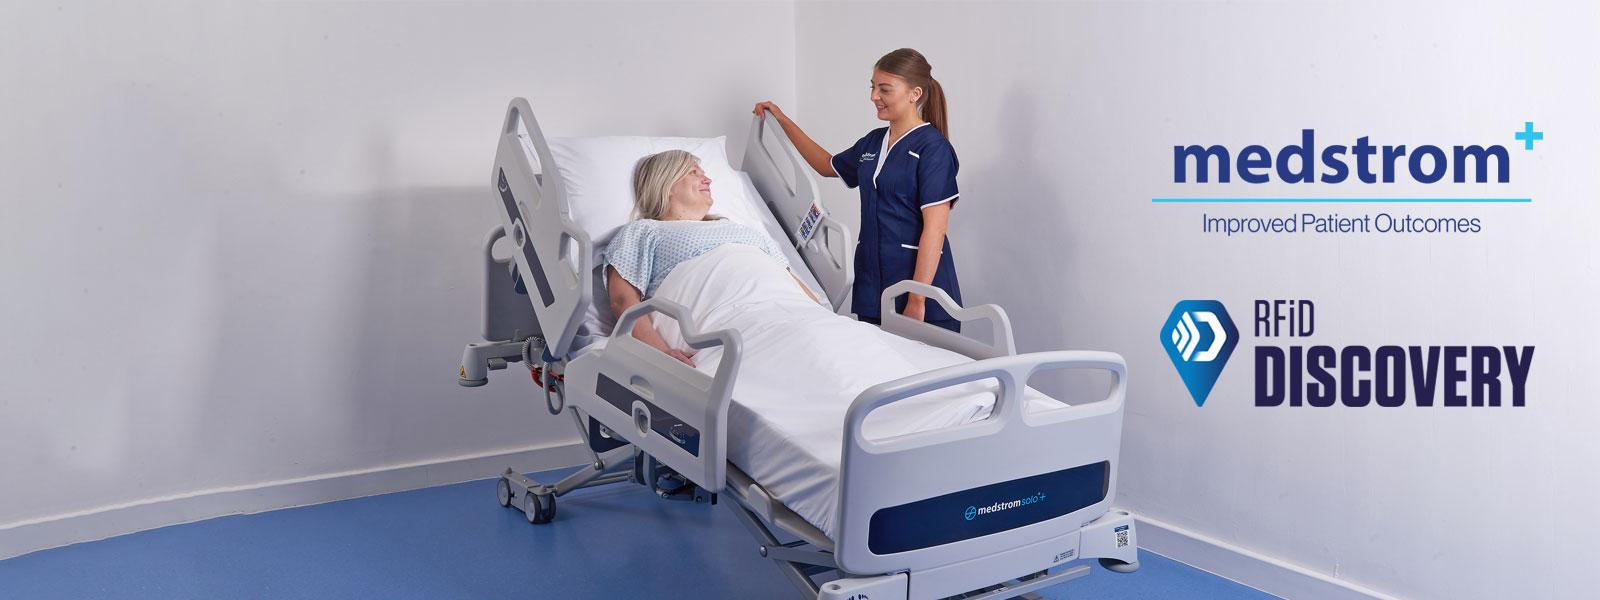 Patient in hospital bed with nurse